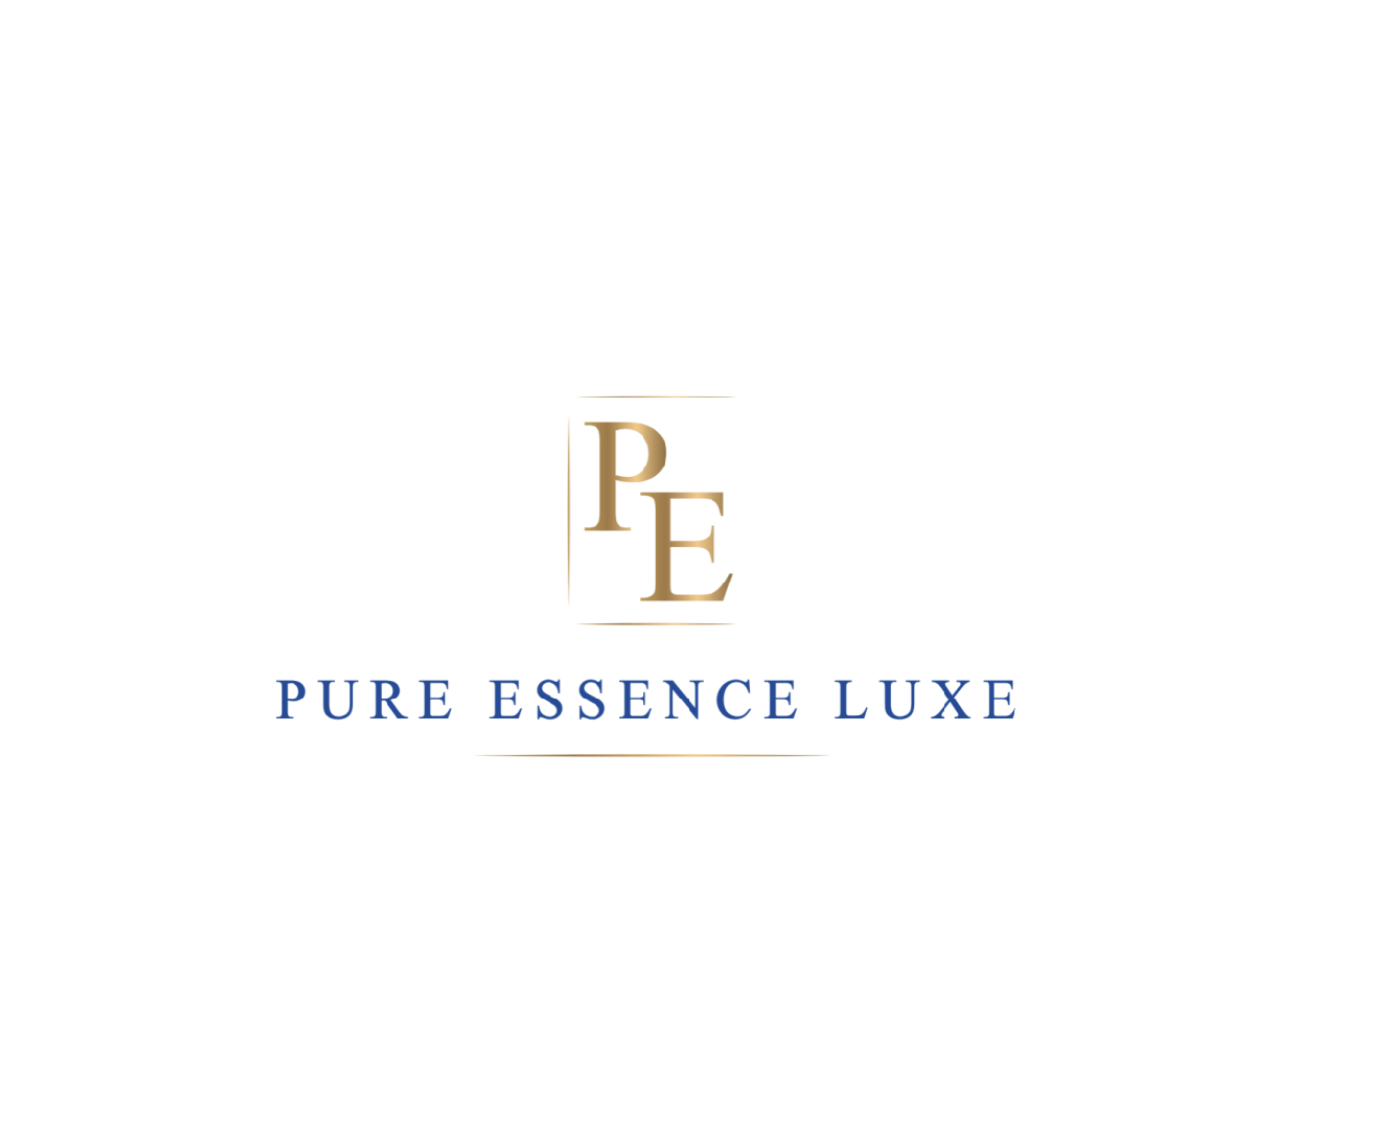 Pure Essence Luxe